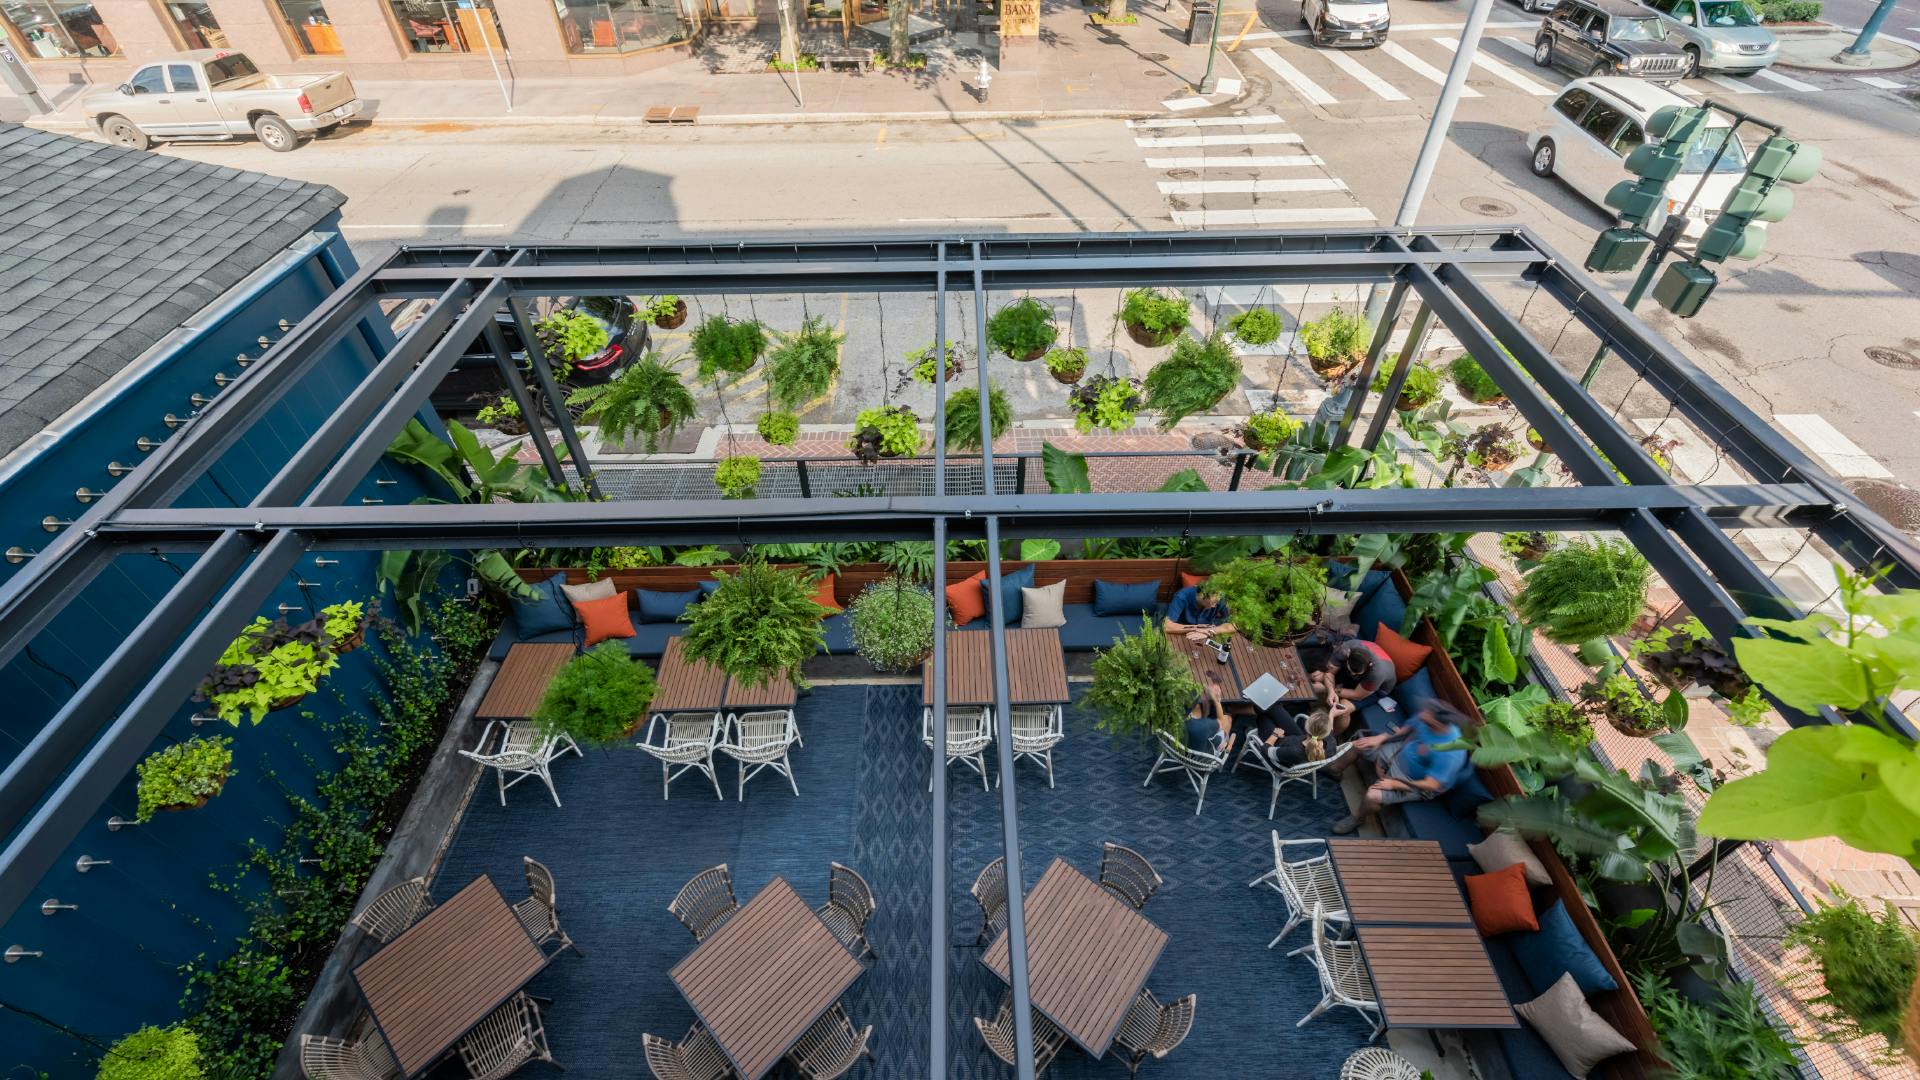 bird's eye view of the courtyard, table tops with lush tropical planting along the perimeter and hanging baskets above steel structure.